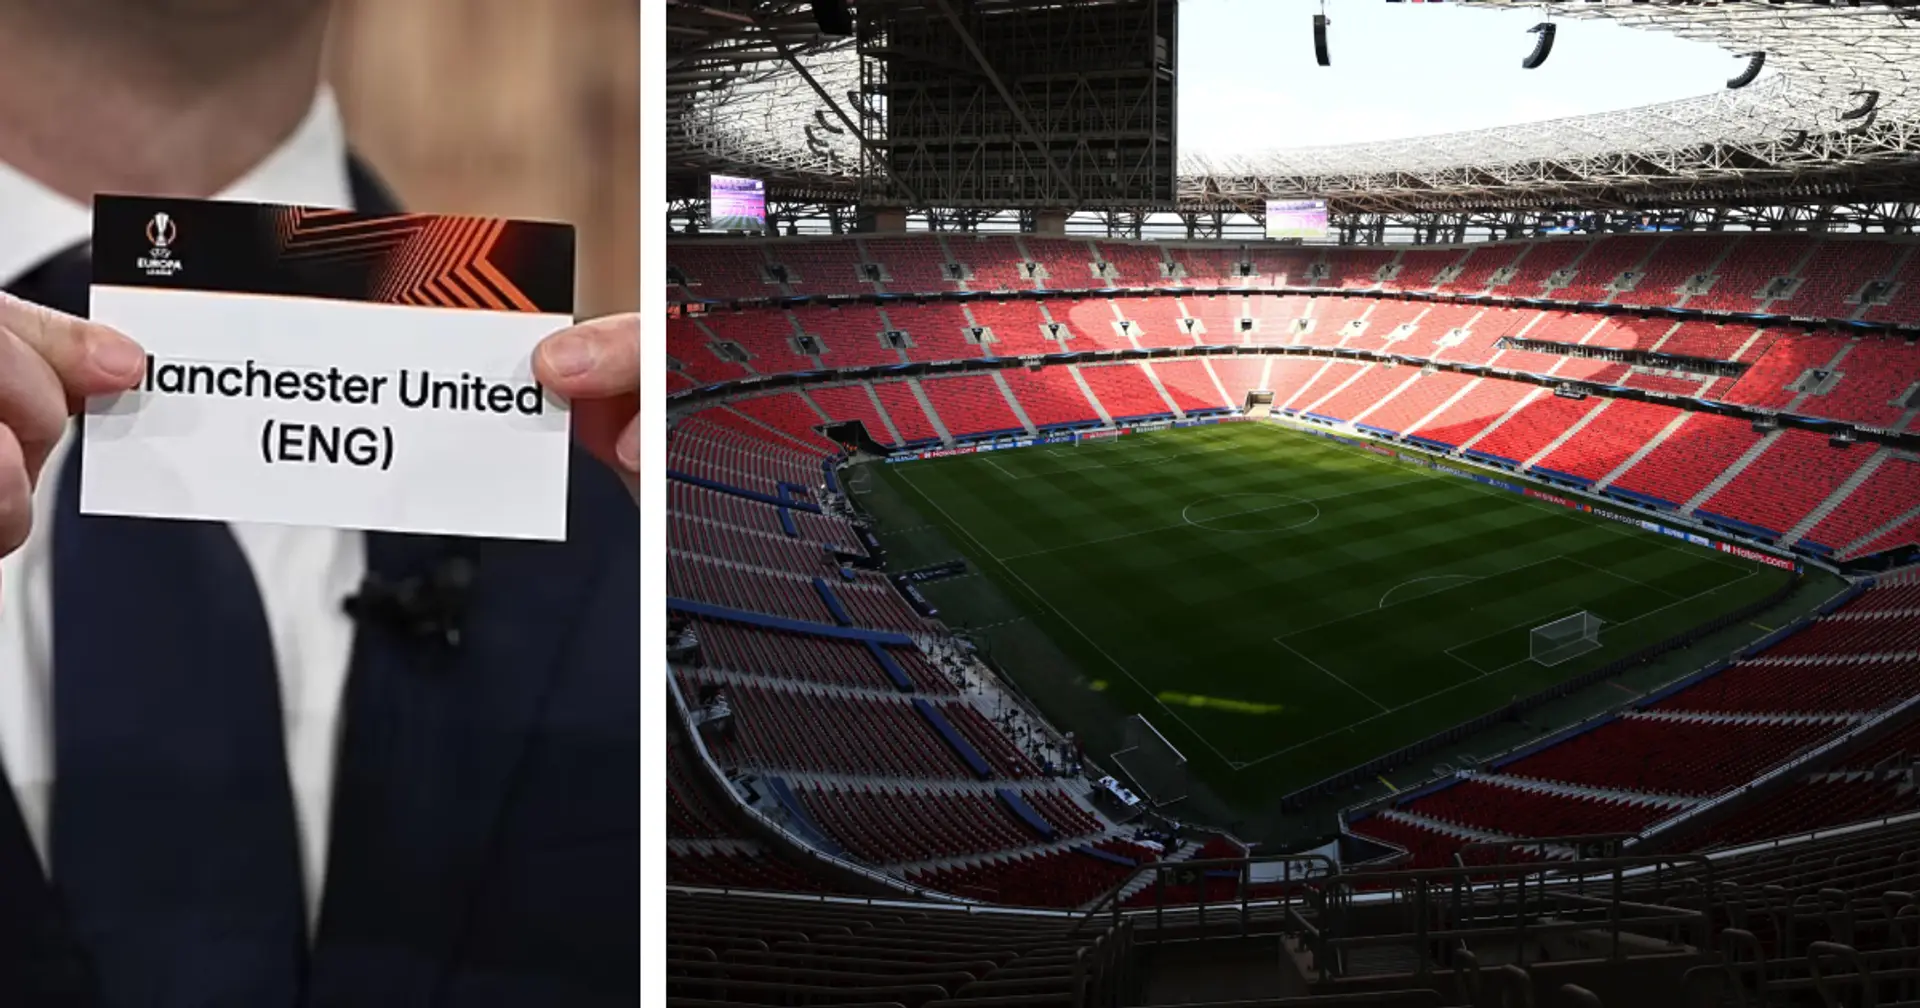 2022/23 Europa League final: date, location & kick-off time — everything you need to know in one place